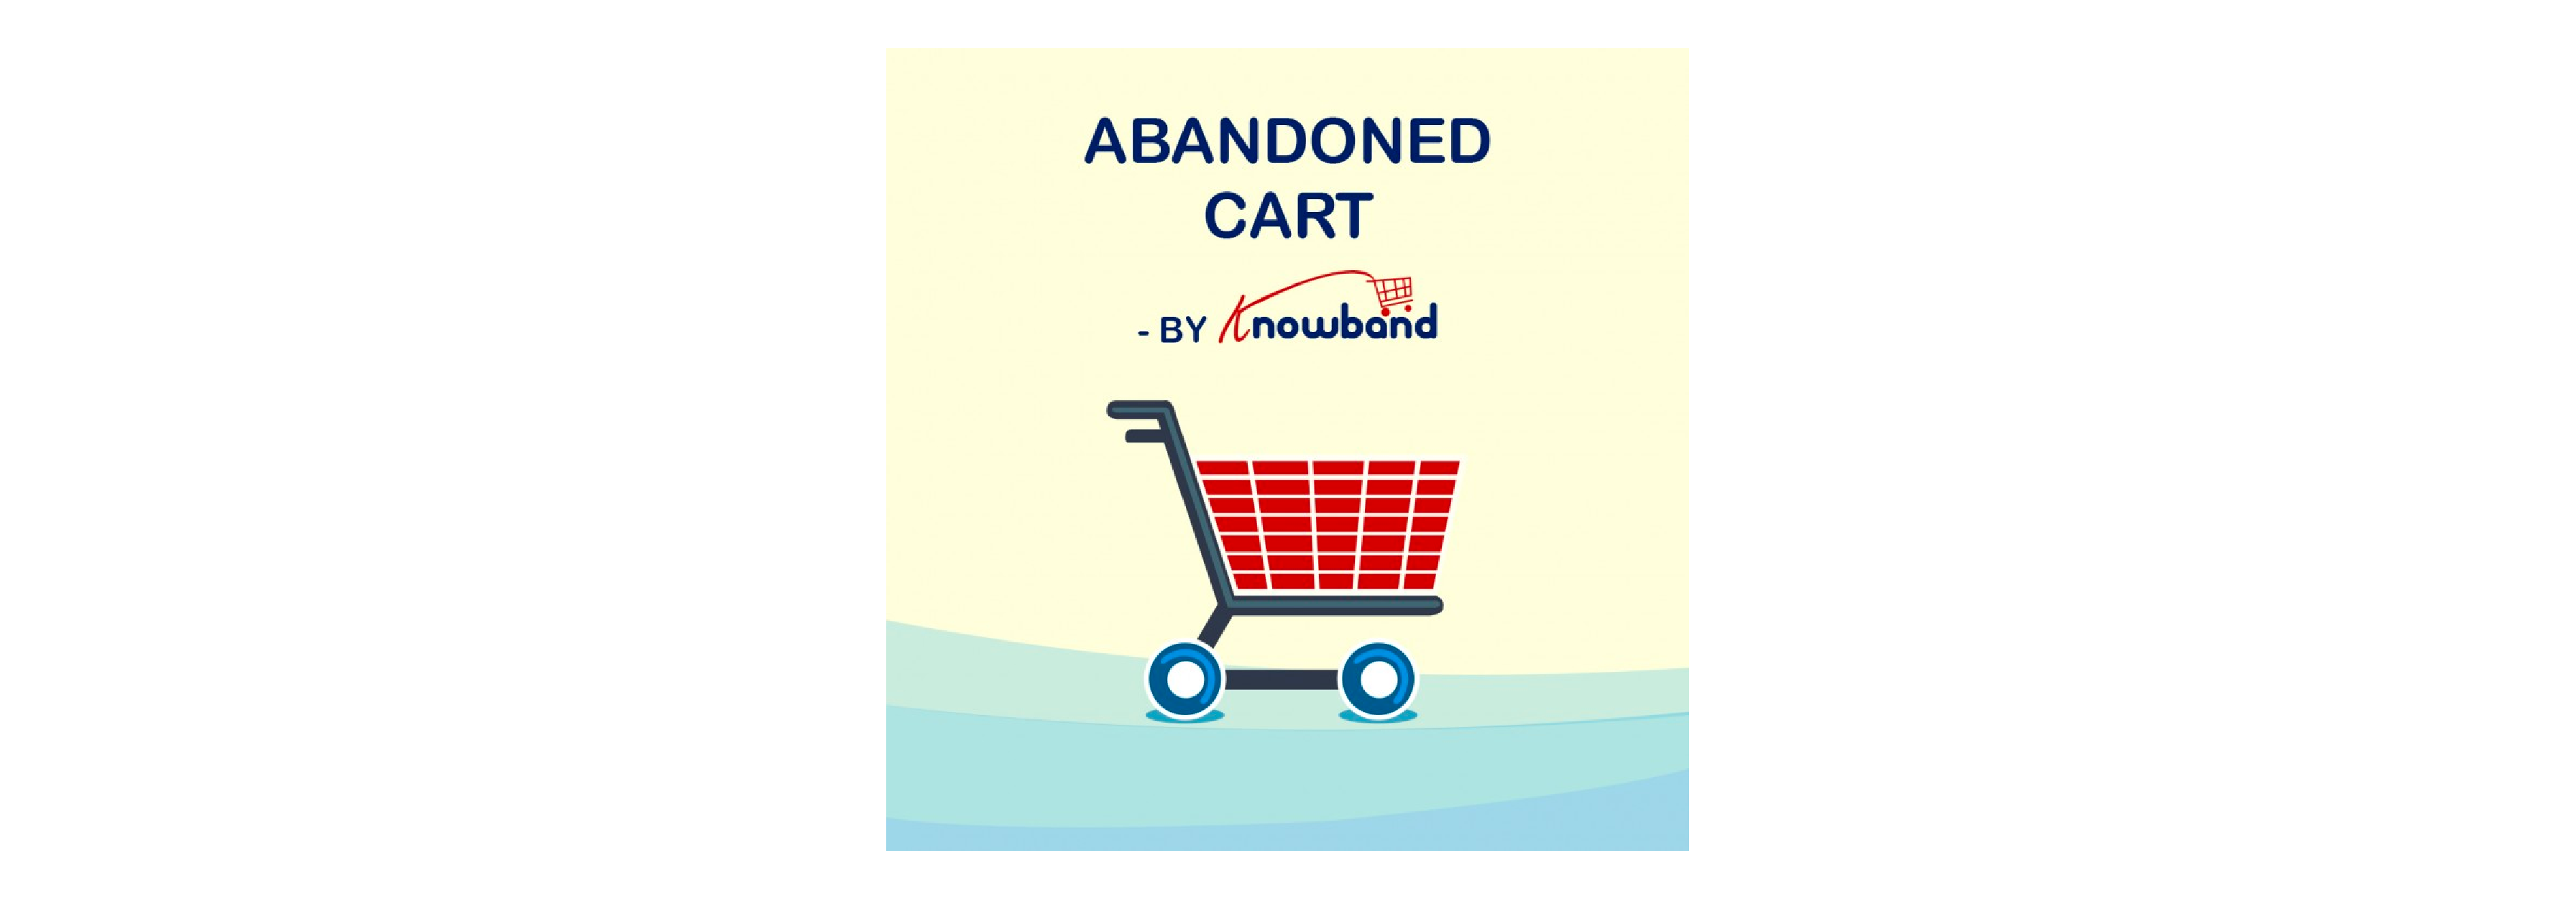 knowband magento abandoned cart email extension